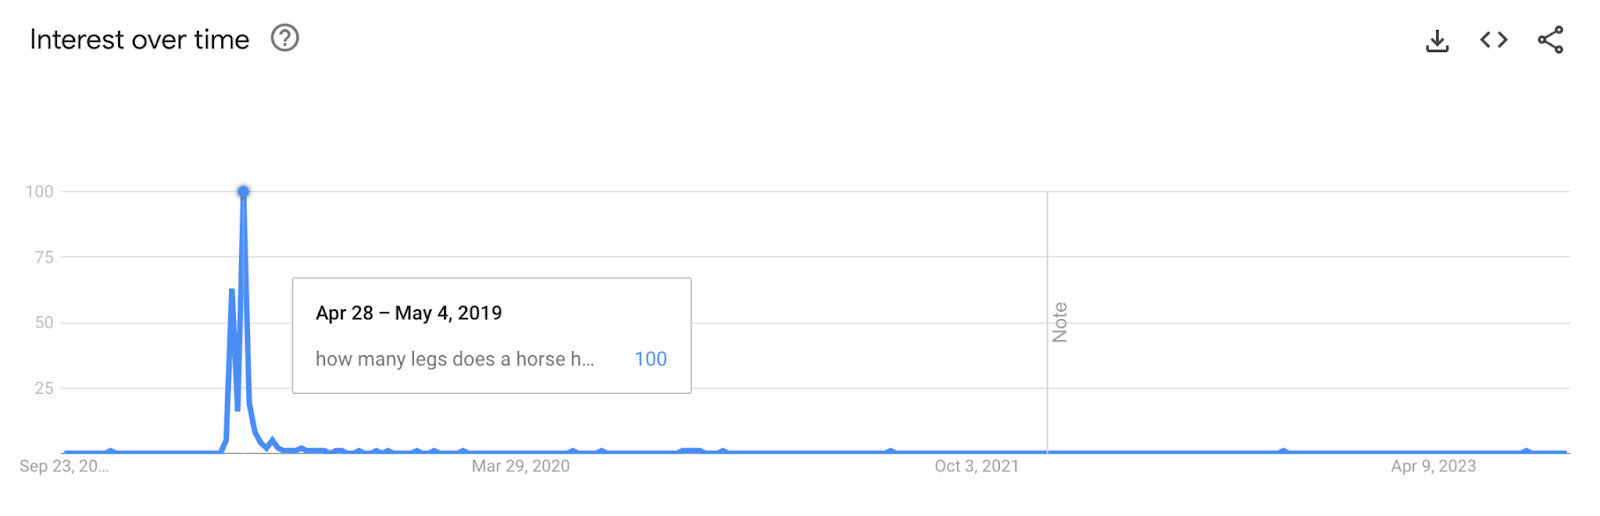 How many legs does a horse have - Google Trends